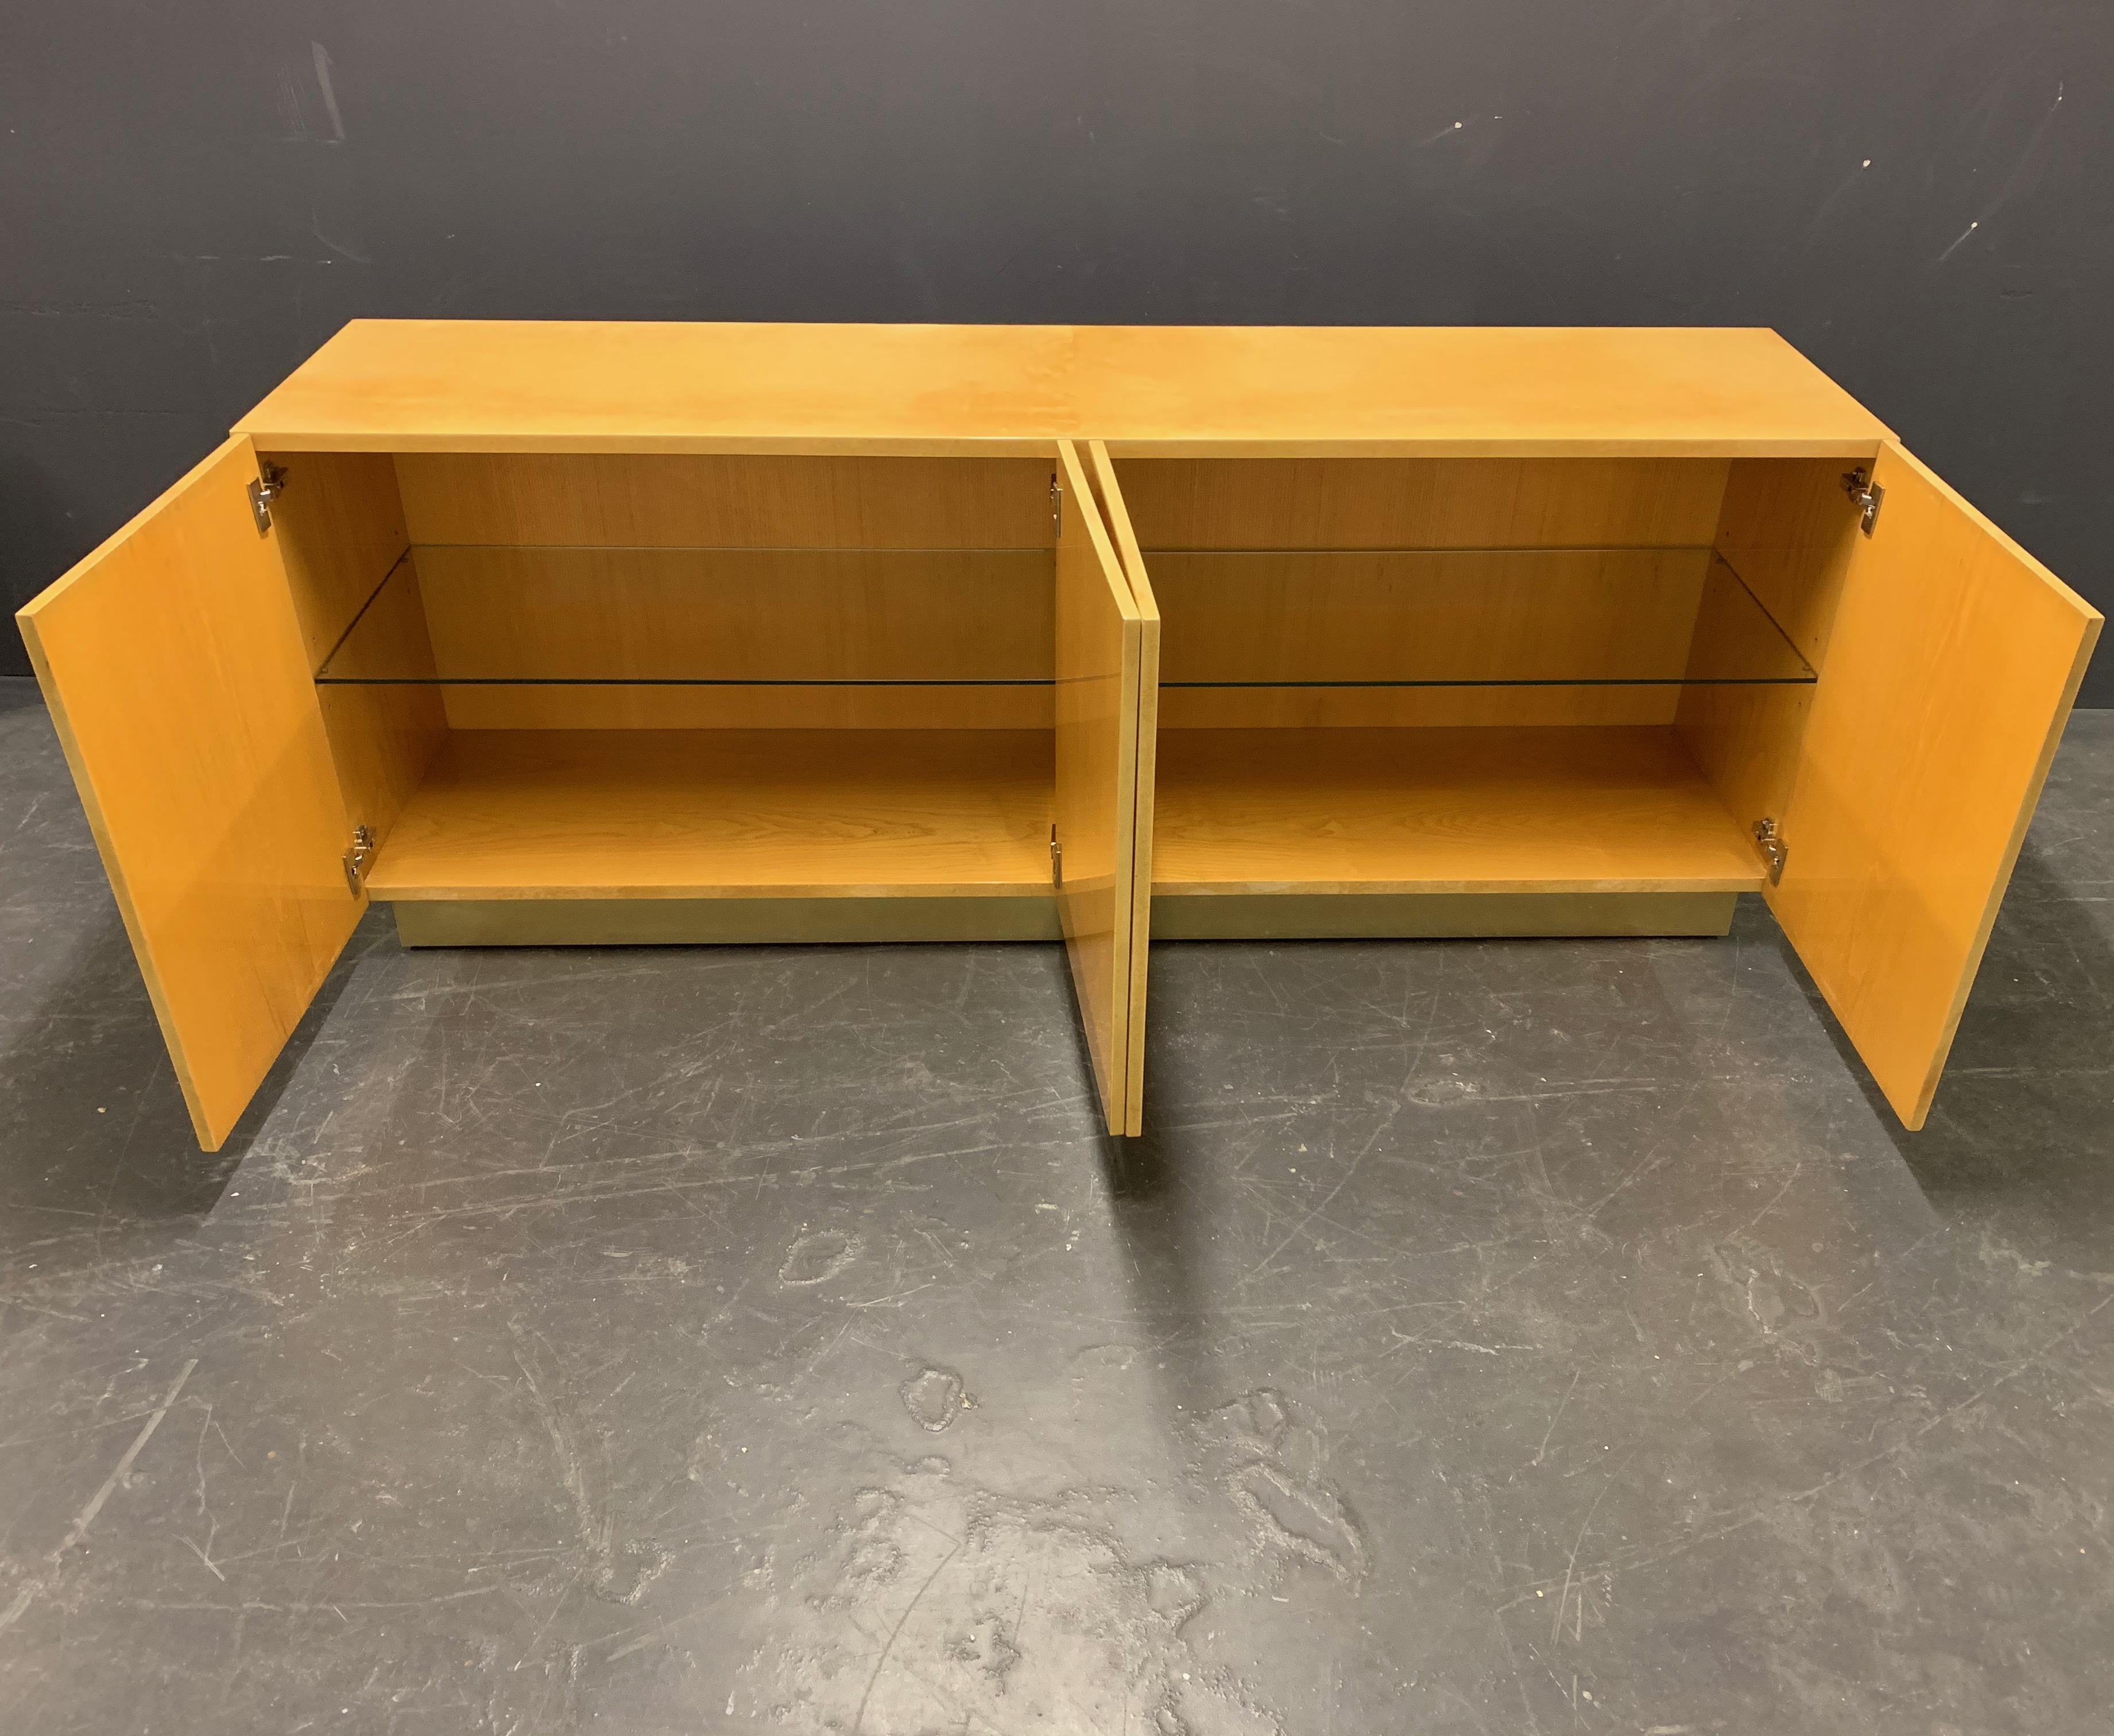 Breathtaking Aldo Tura Sideboard or Room Divider with Real Back For Sale 2